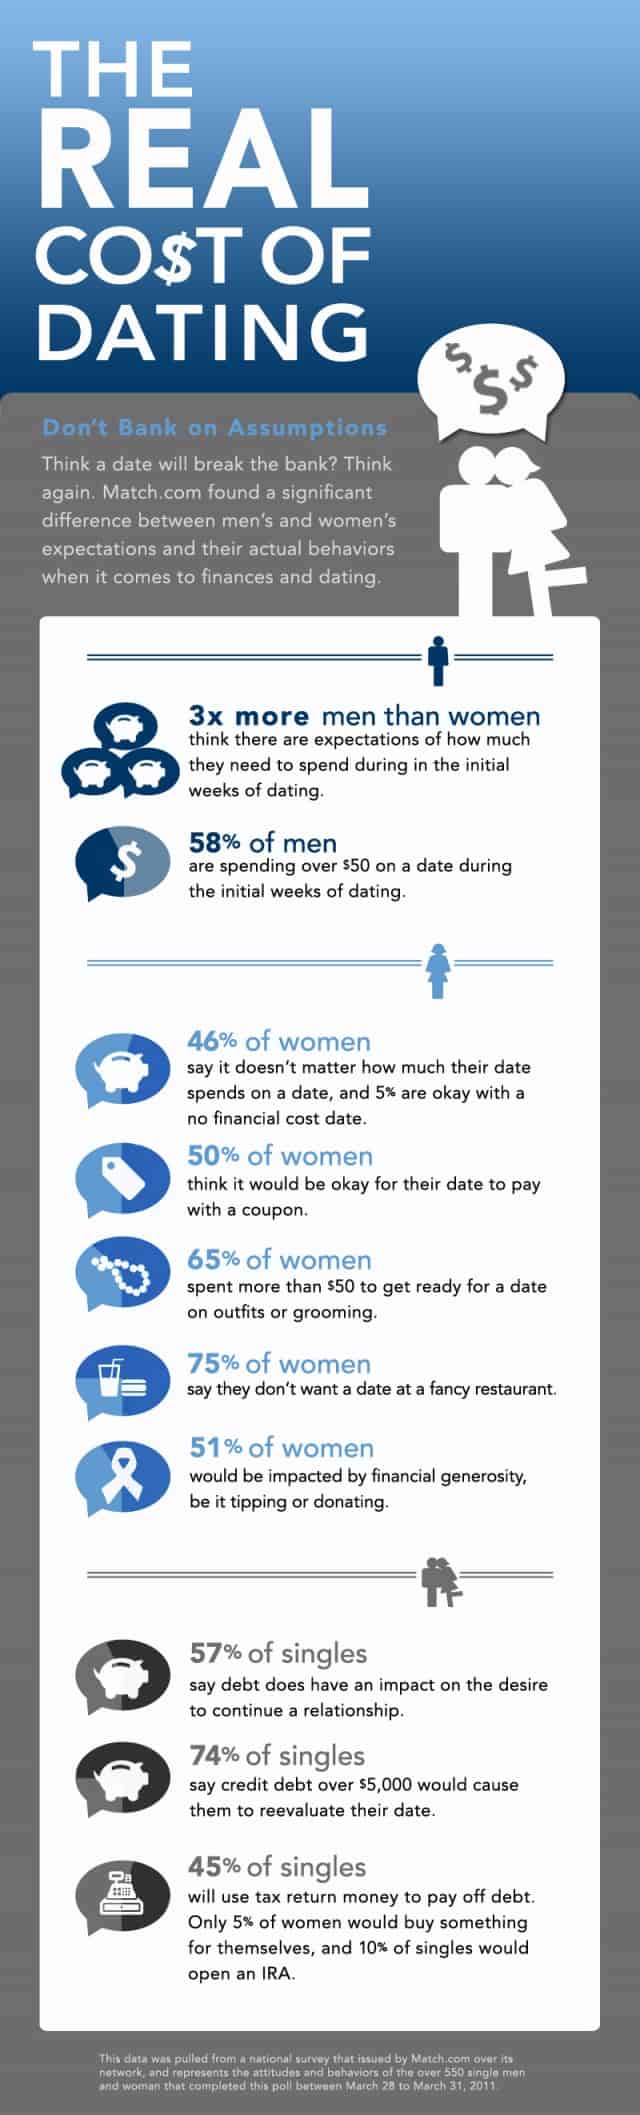 Real Cost of Dating Infographic